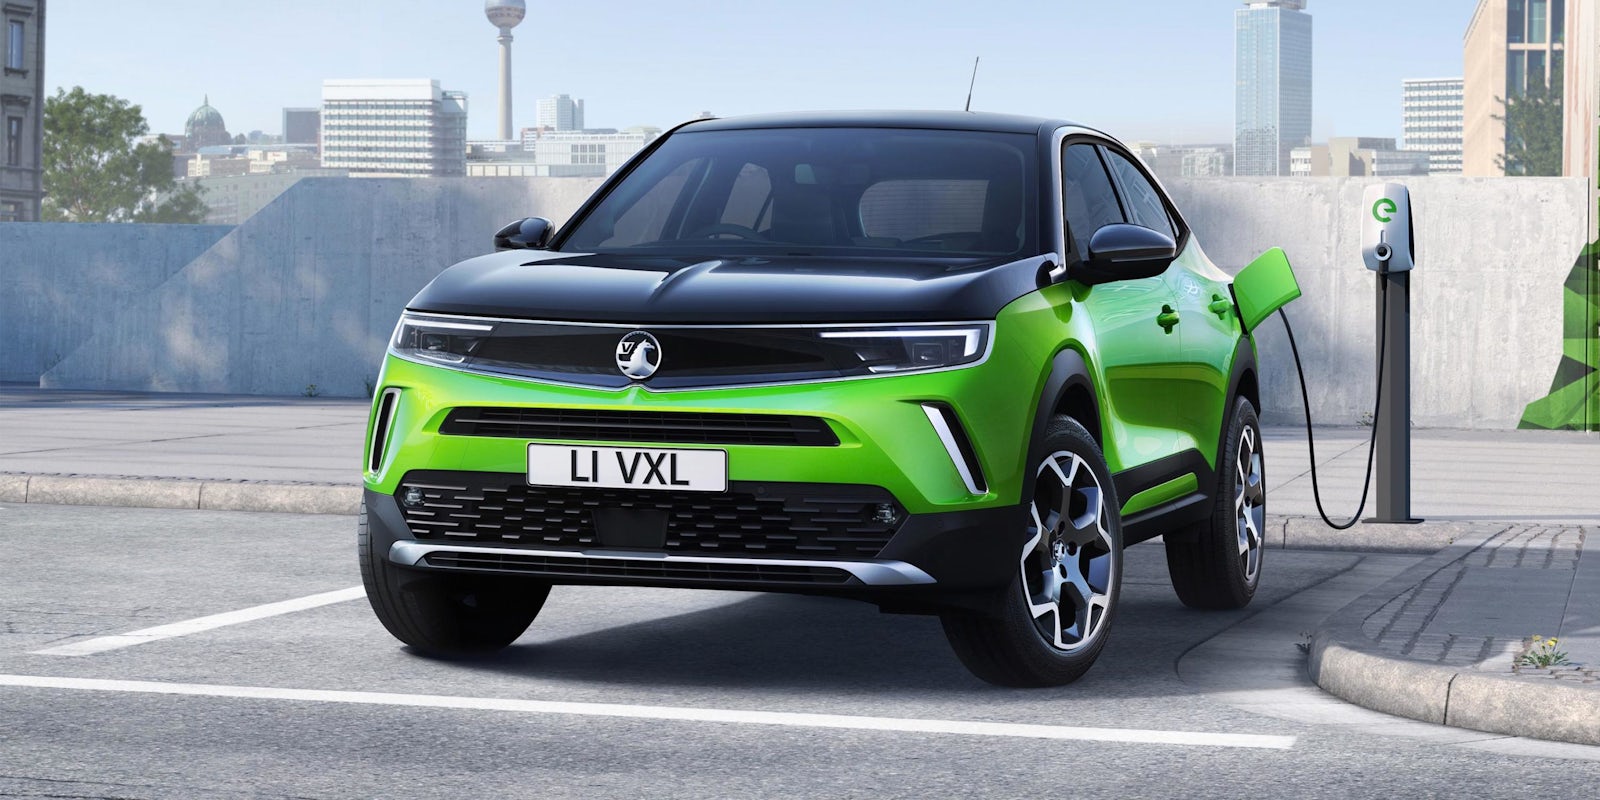 New 2021 electric Vauxhall Mokka e revealed price, specs and release